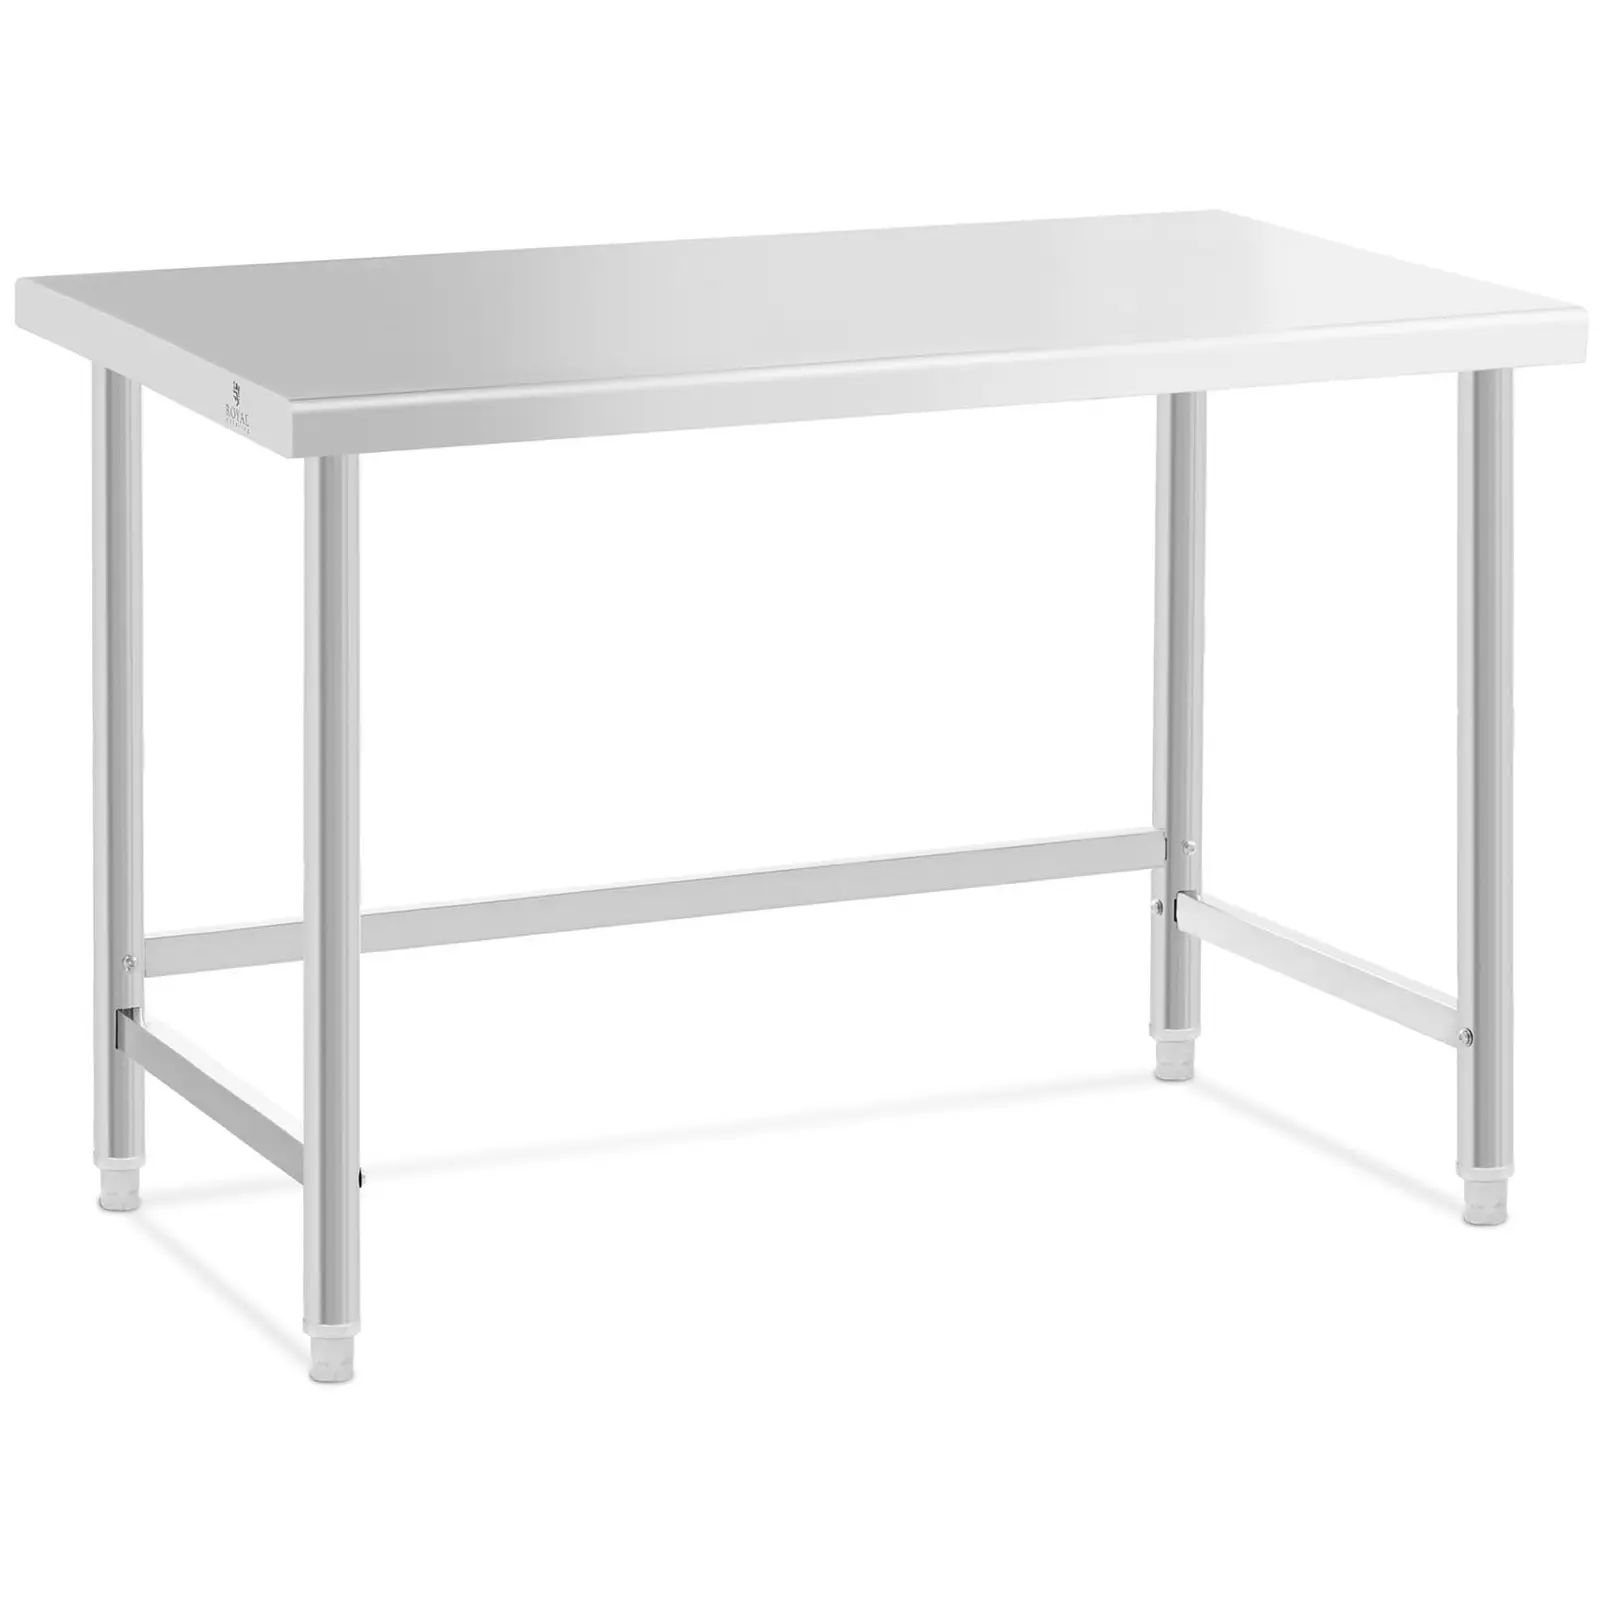 Stainless steel table - 120 x 60 cm - 91 kg load capacity - Royal Catering